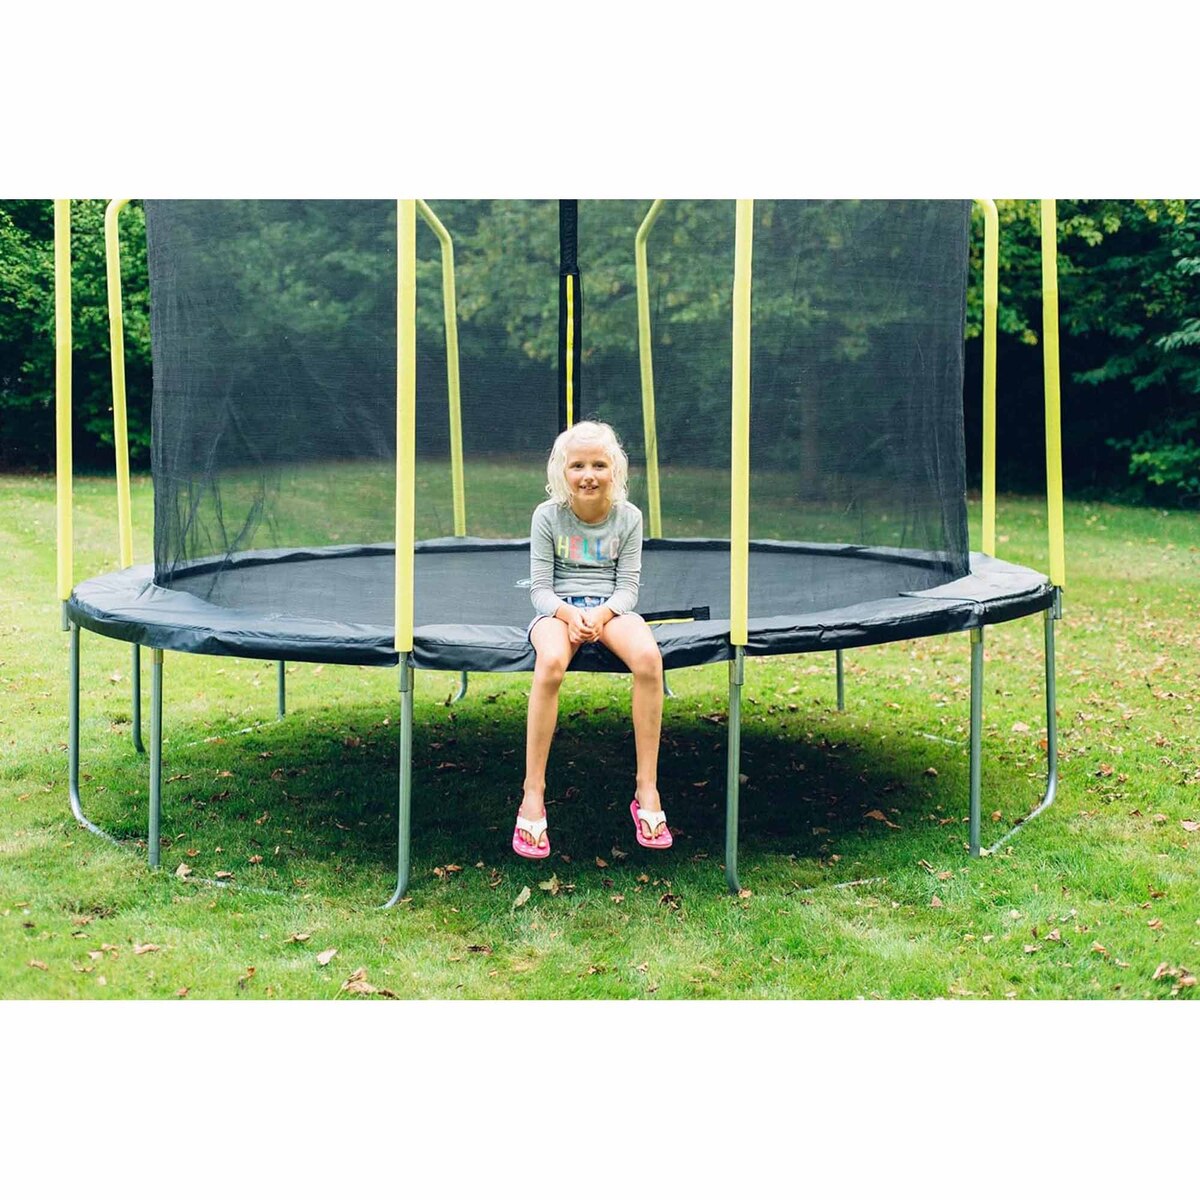 Plum Springsafe Fun Trampoline With Safety Enclosure, 12 ft, 27574AB82